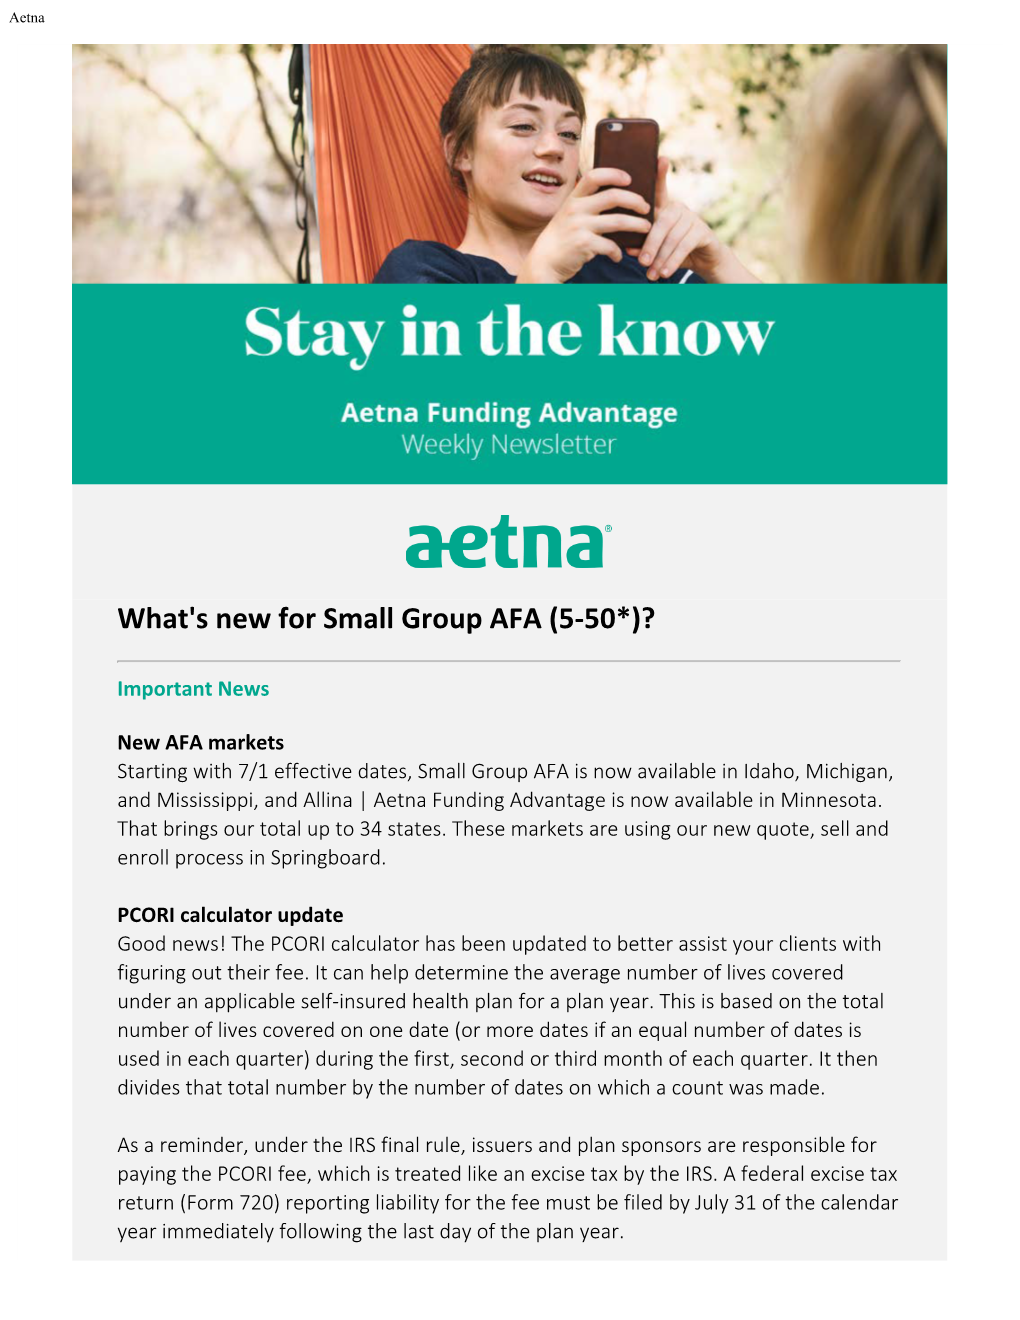 What's New for Small Group AFA (5-50*)?